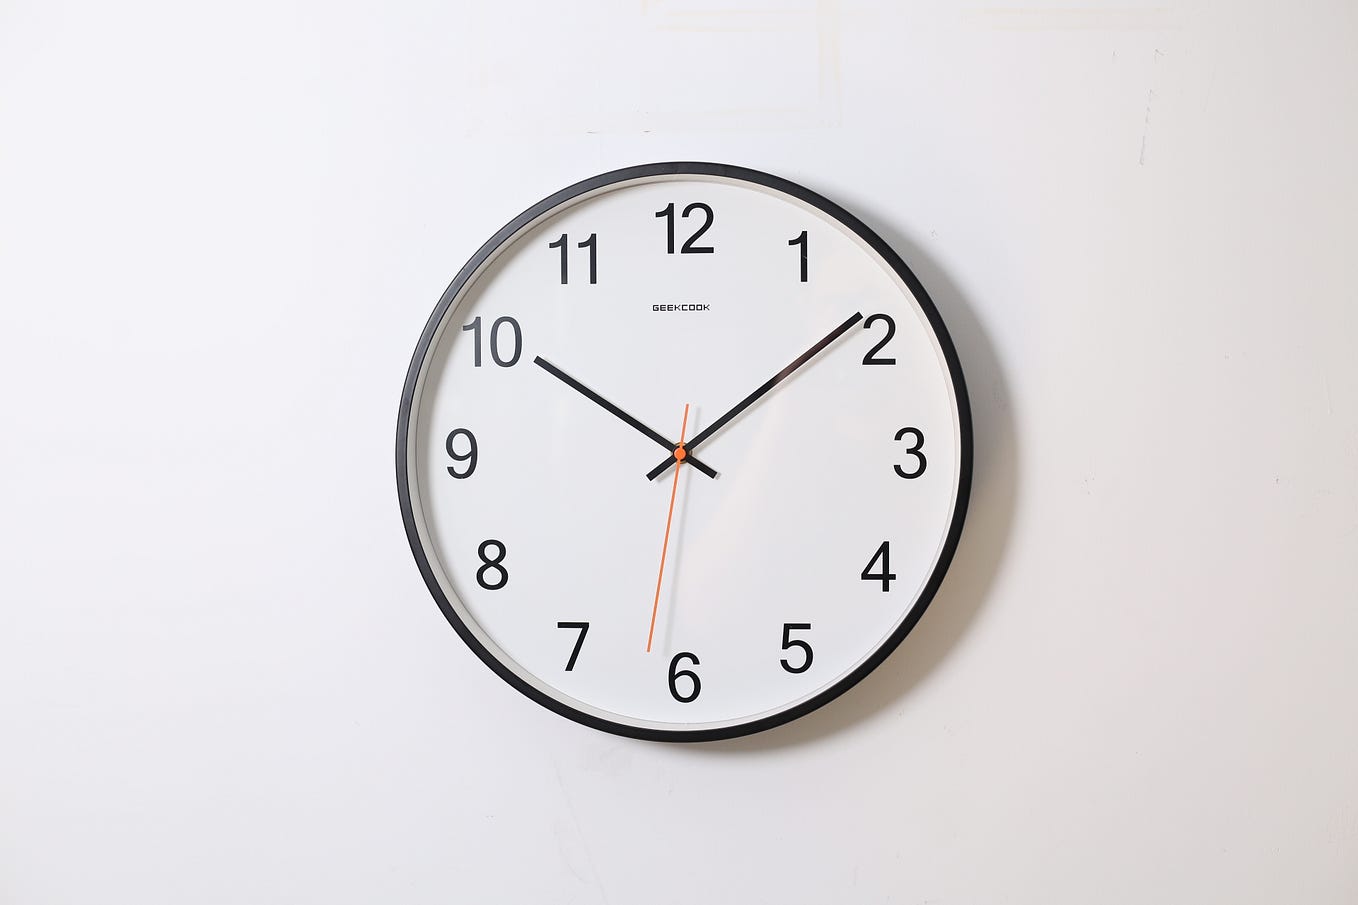 Did you know, Why all Clocks mention as 10.10 initially?